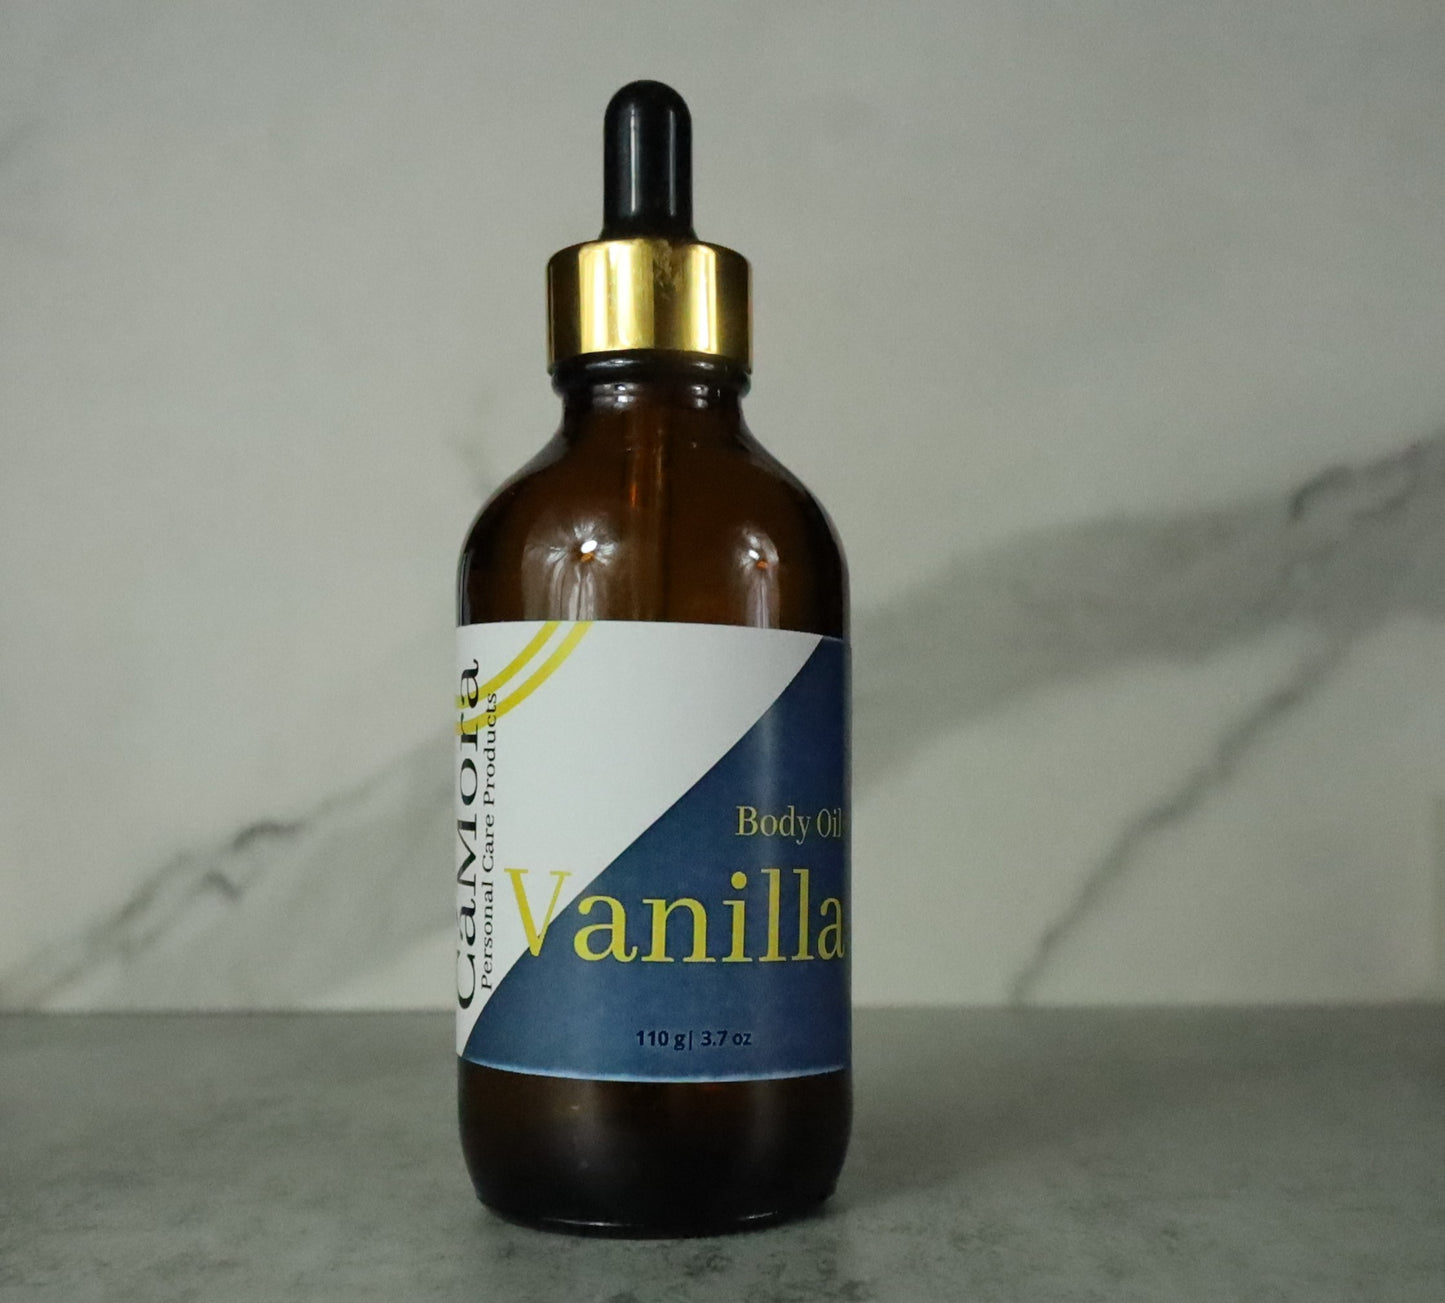 Vanilla Organic Body Oil, 4 ounces, infused with a proprietary blend of essential oils to promote moisturized skin.